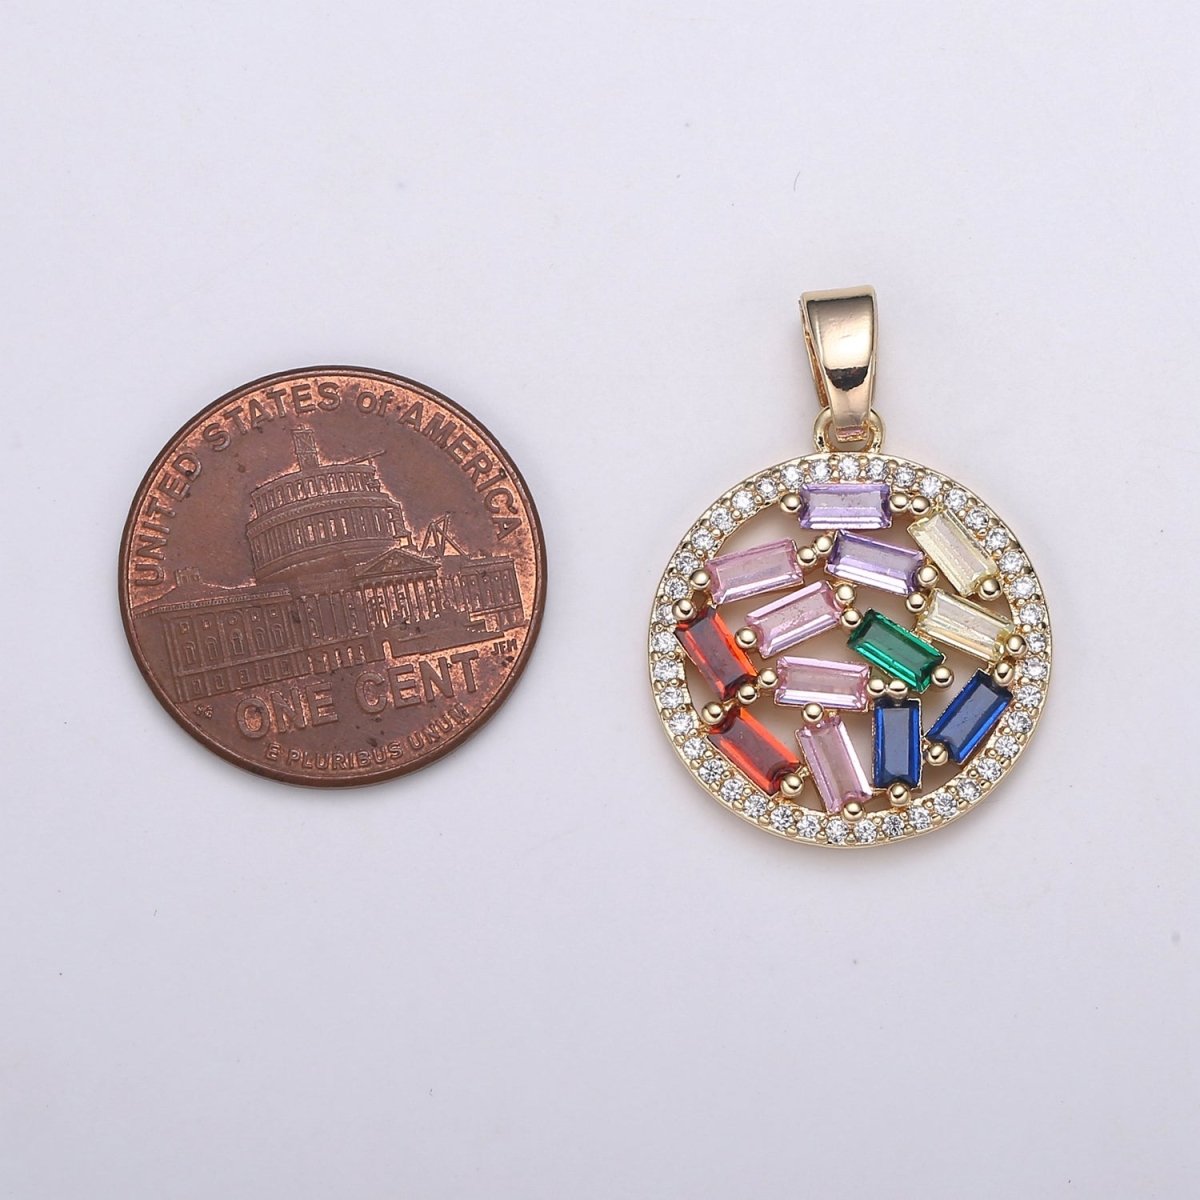 26X18mm 18K Rose Gold Round Charms, Multi Color Baguette CZ Pendant, Pave Cz Circle Charm for Minimalist Jewelry supply, J-285 - DLUXCA